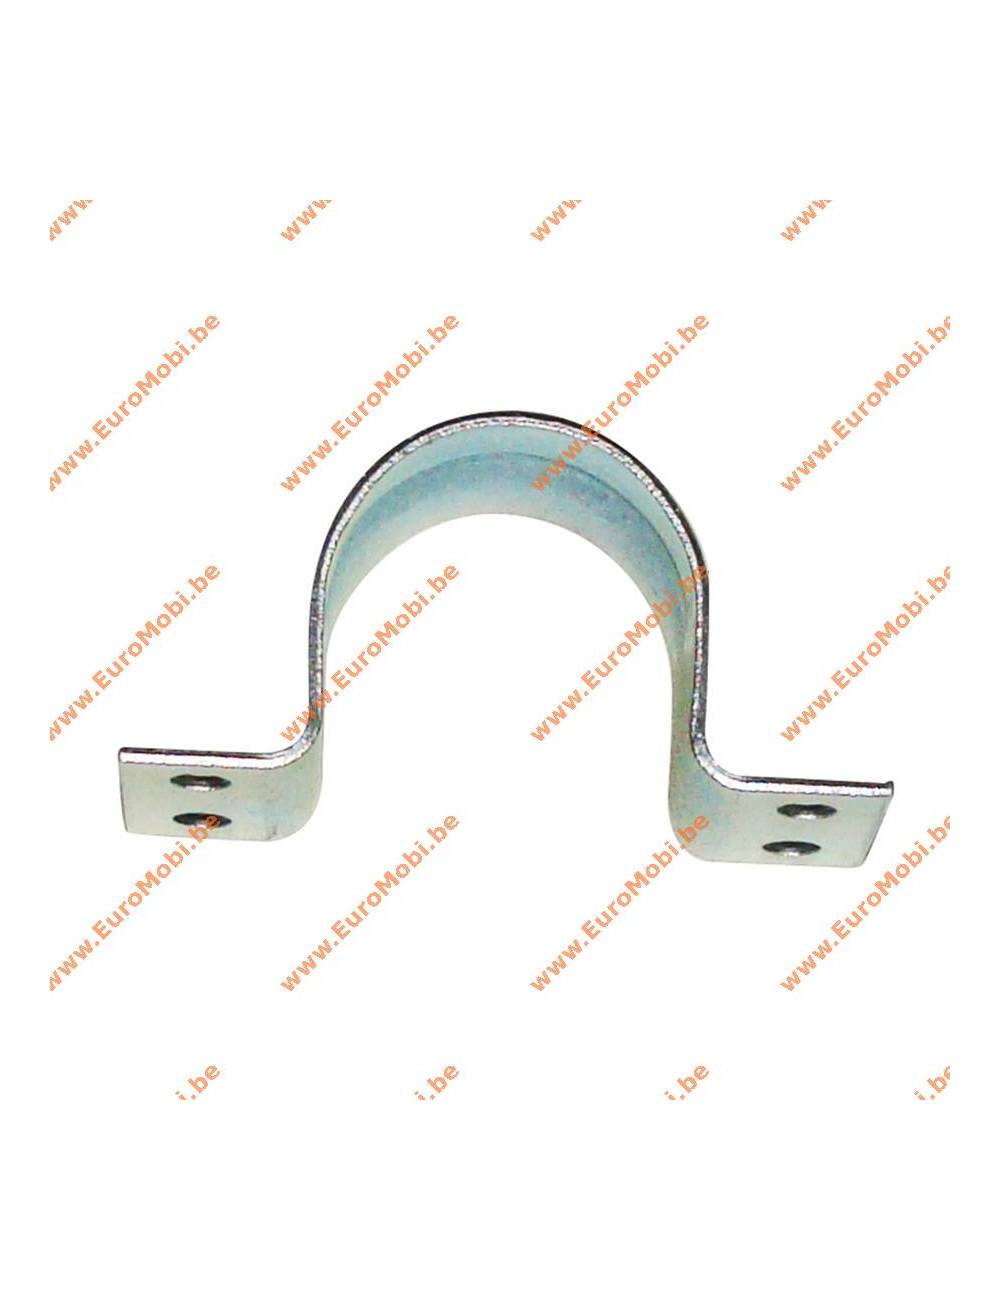 Pipe bracket 28 mm galvanized Mater table